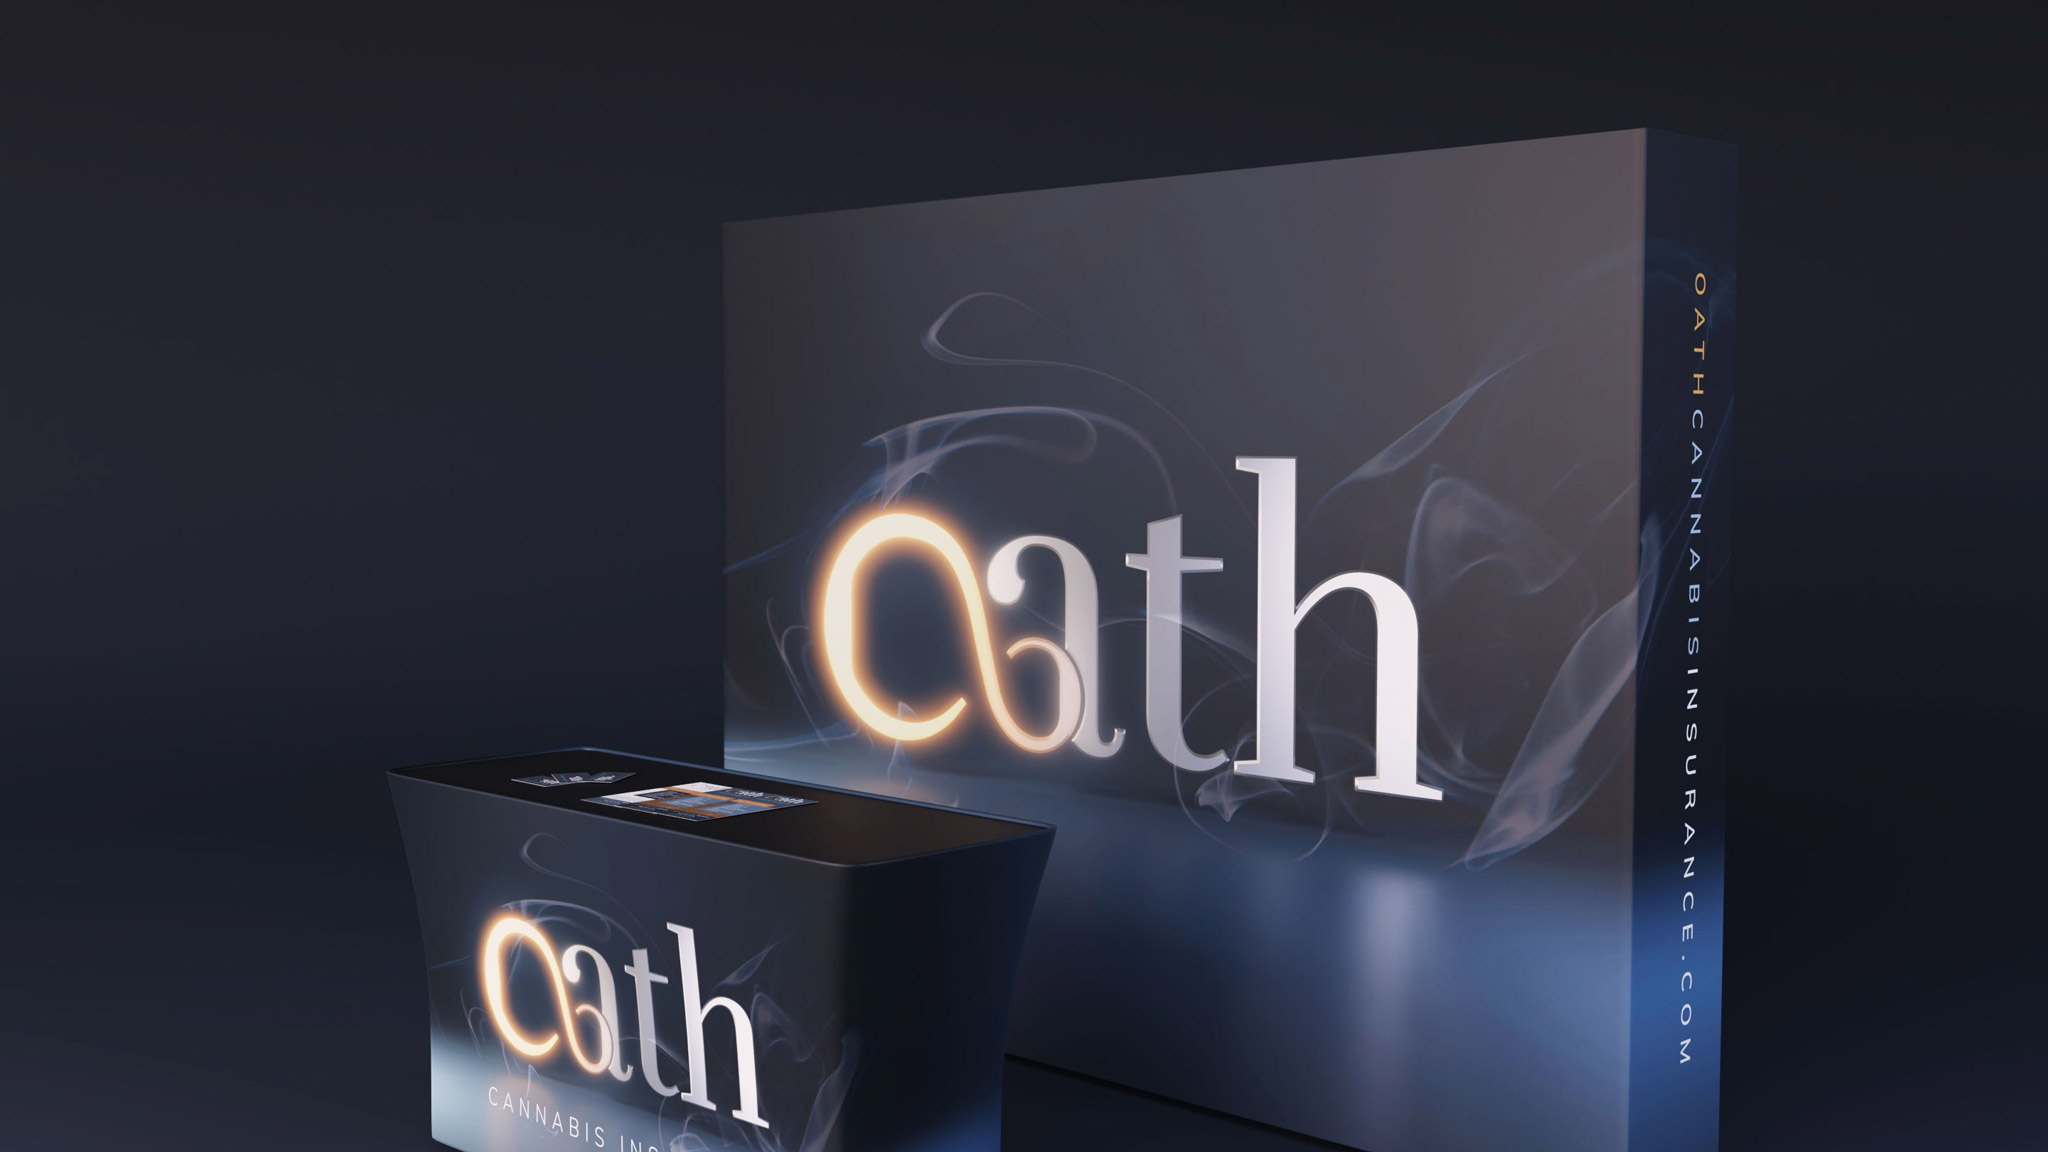 Oath Insurance trade show booth design